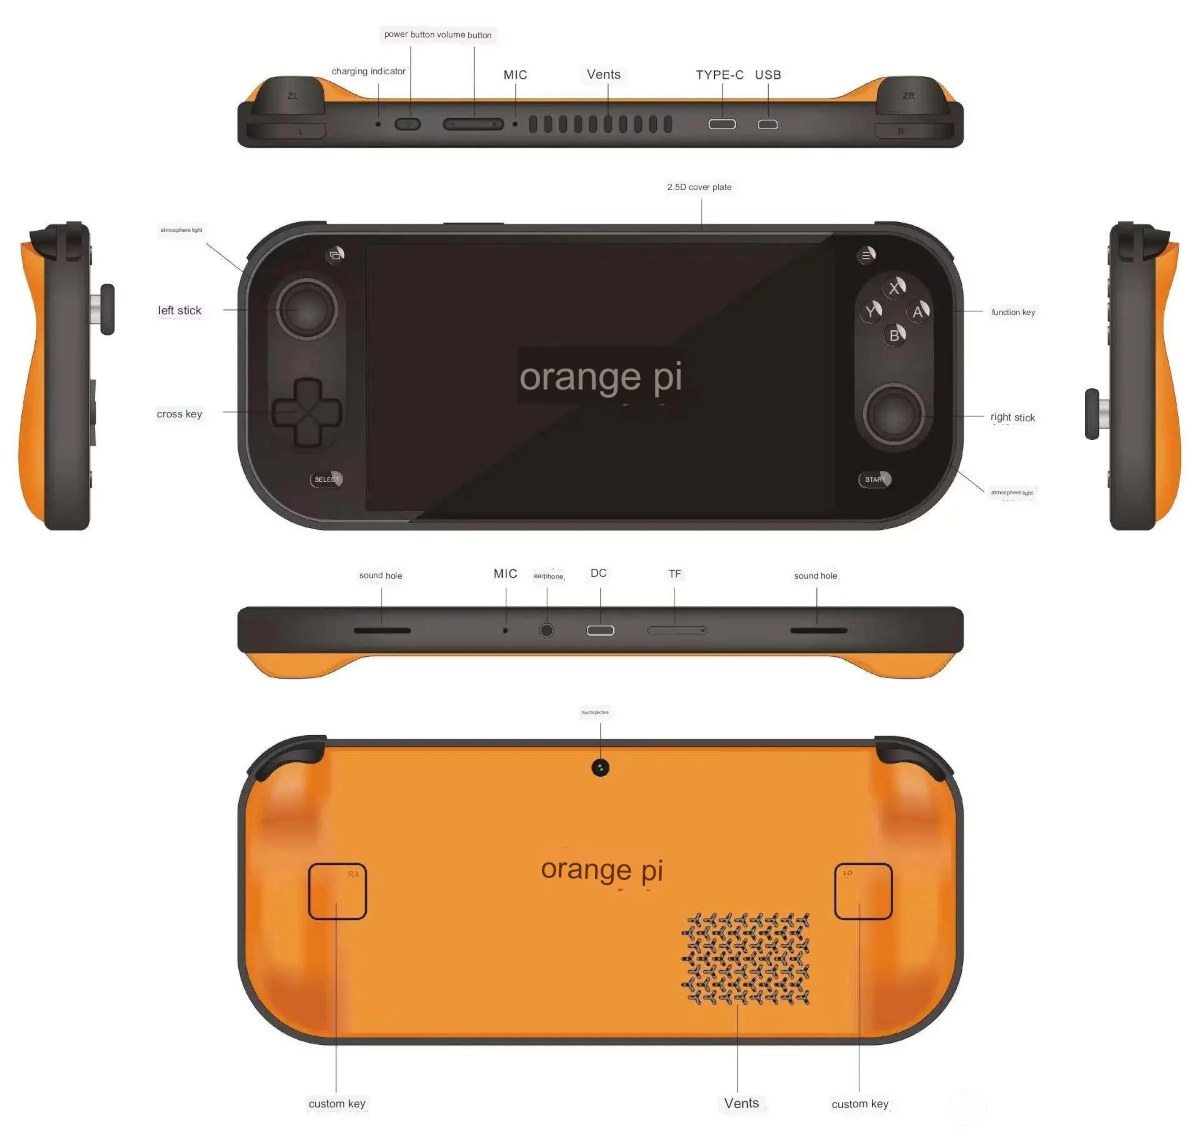 Orange Pi is working on a portable gaming console with Rockchip RK3588S or AMD Ryzen 7 CPU